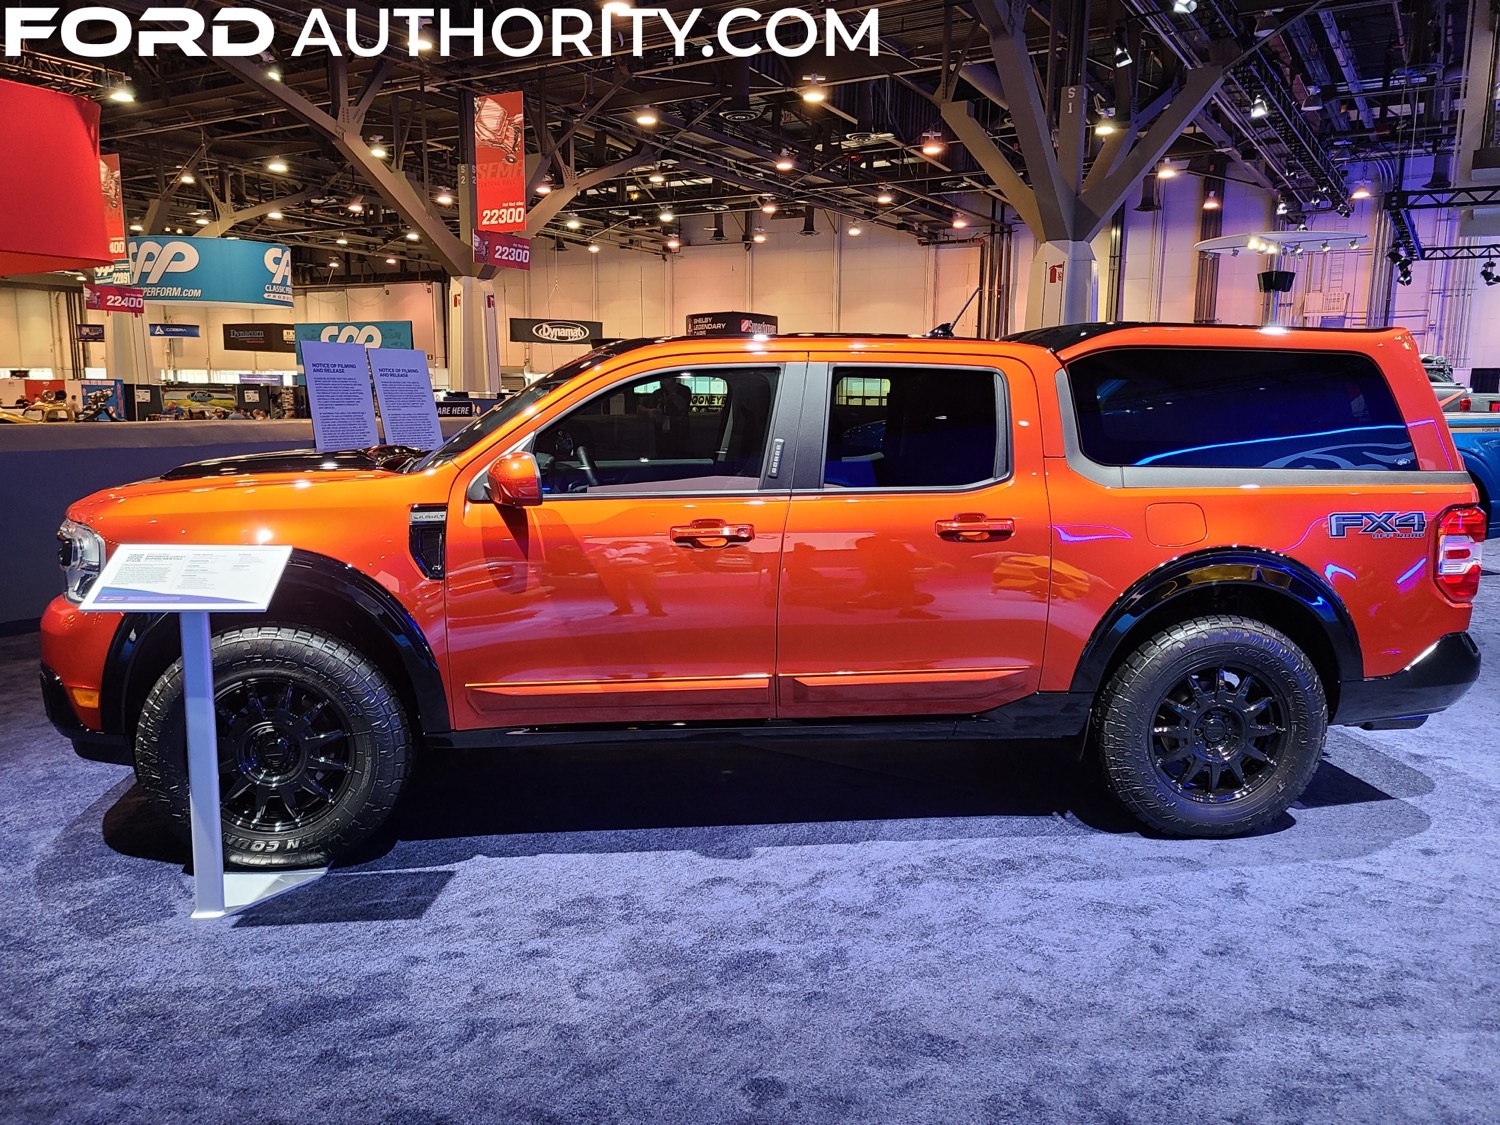 Ford Makes ComplexCon Debut With 2022 Maverick Customized By Big